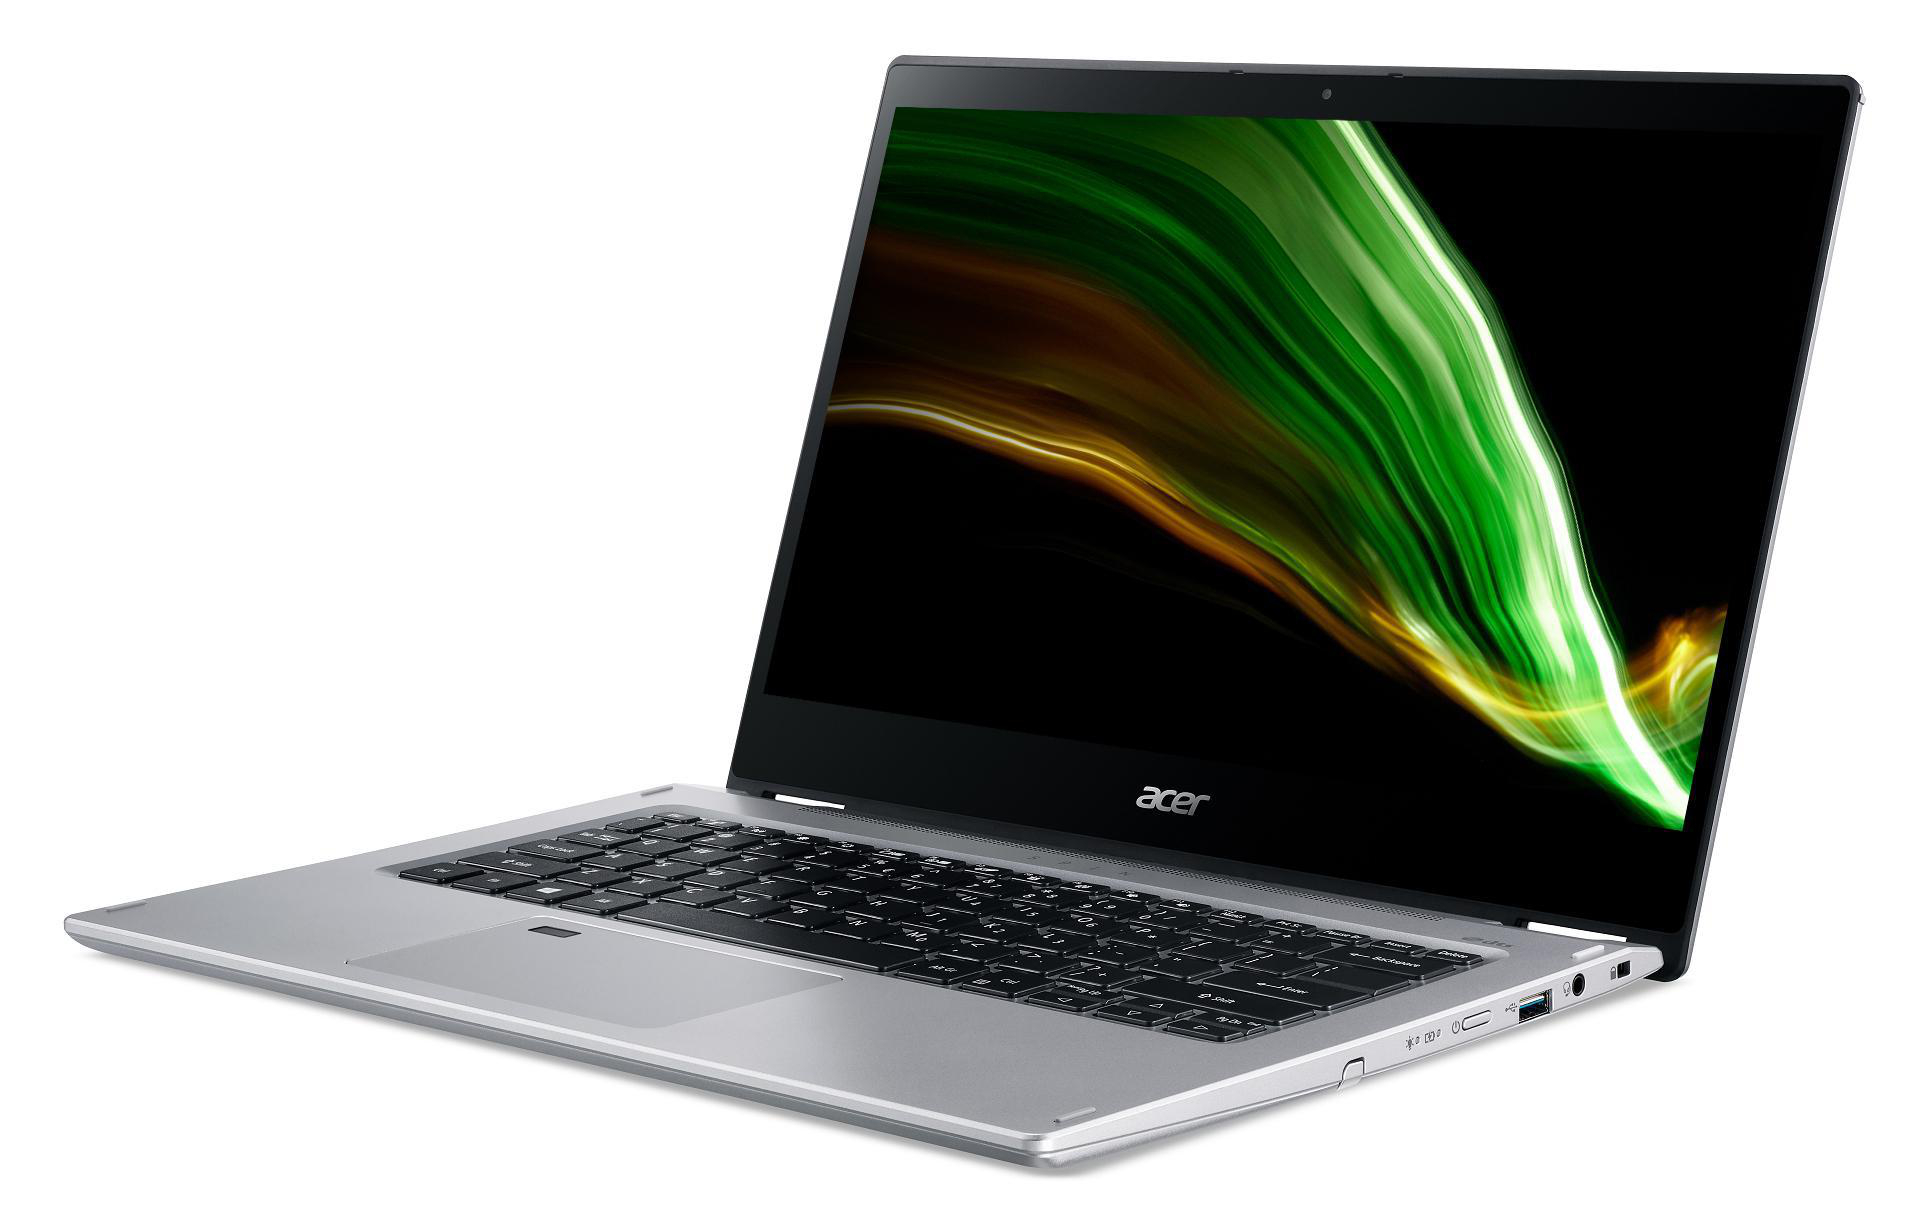 Athlon™ 4 Notebook, AMD, (SP314-21N-R686), Bit) Home Radeon™ mit Graphics, Prozessor, AMD (64 GB Windows SSD, GB Acer Touchscreen, Zoll 10 Spin Silber 3 Silver ACER 14 128 RAM, S-Modus Onboard Display